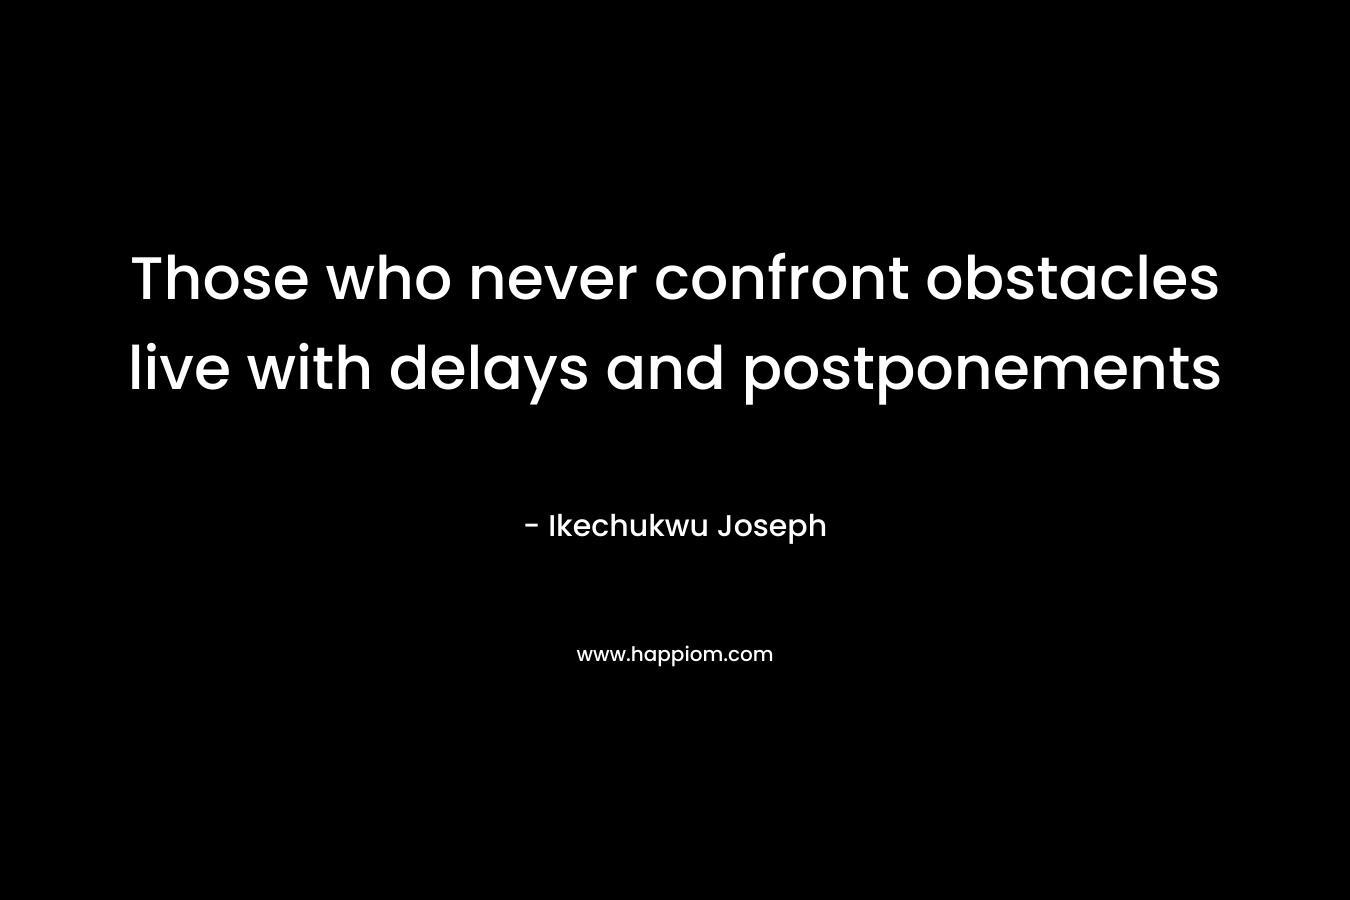 Those who never confront obstacles live with delays and postponements – Ikechukwu Joseph